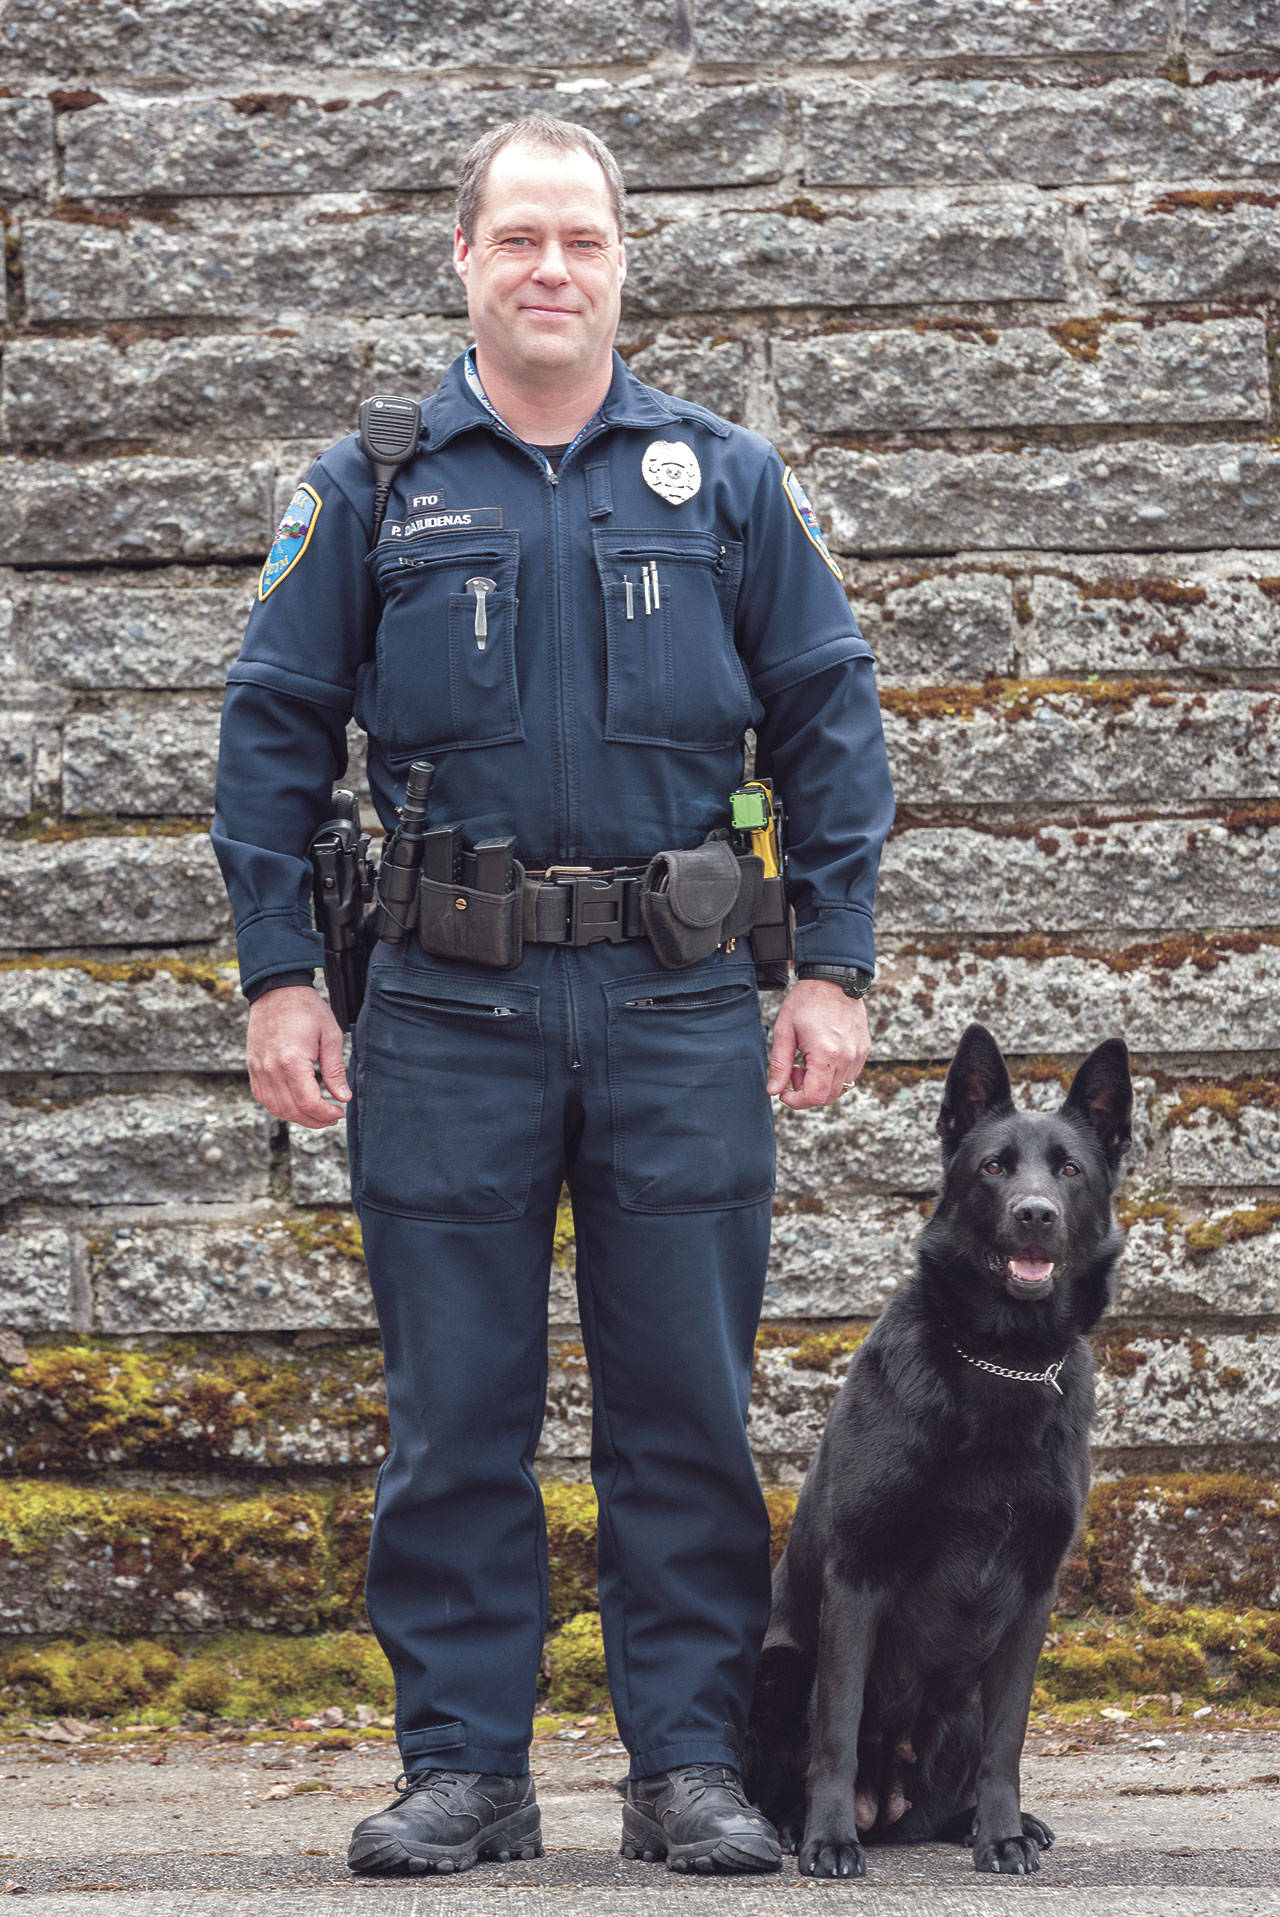 Sequim’s new K-9 team Detective Paul Dailidenas and Mamba are now patrolling the city together after receiving state certification. Photo courtesy City of Sequim